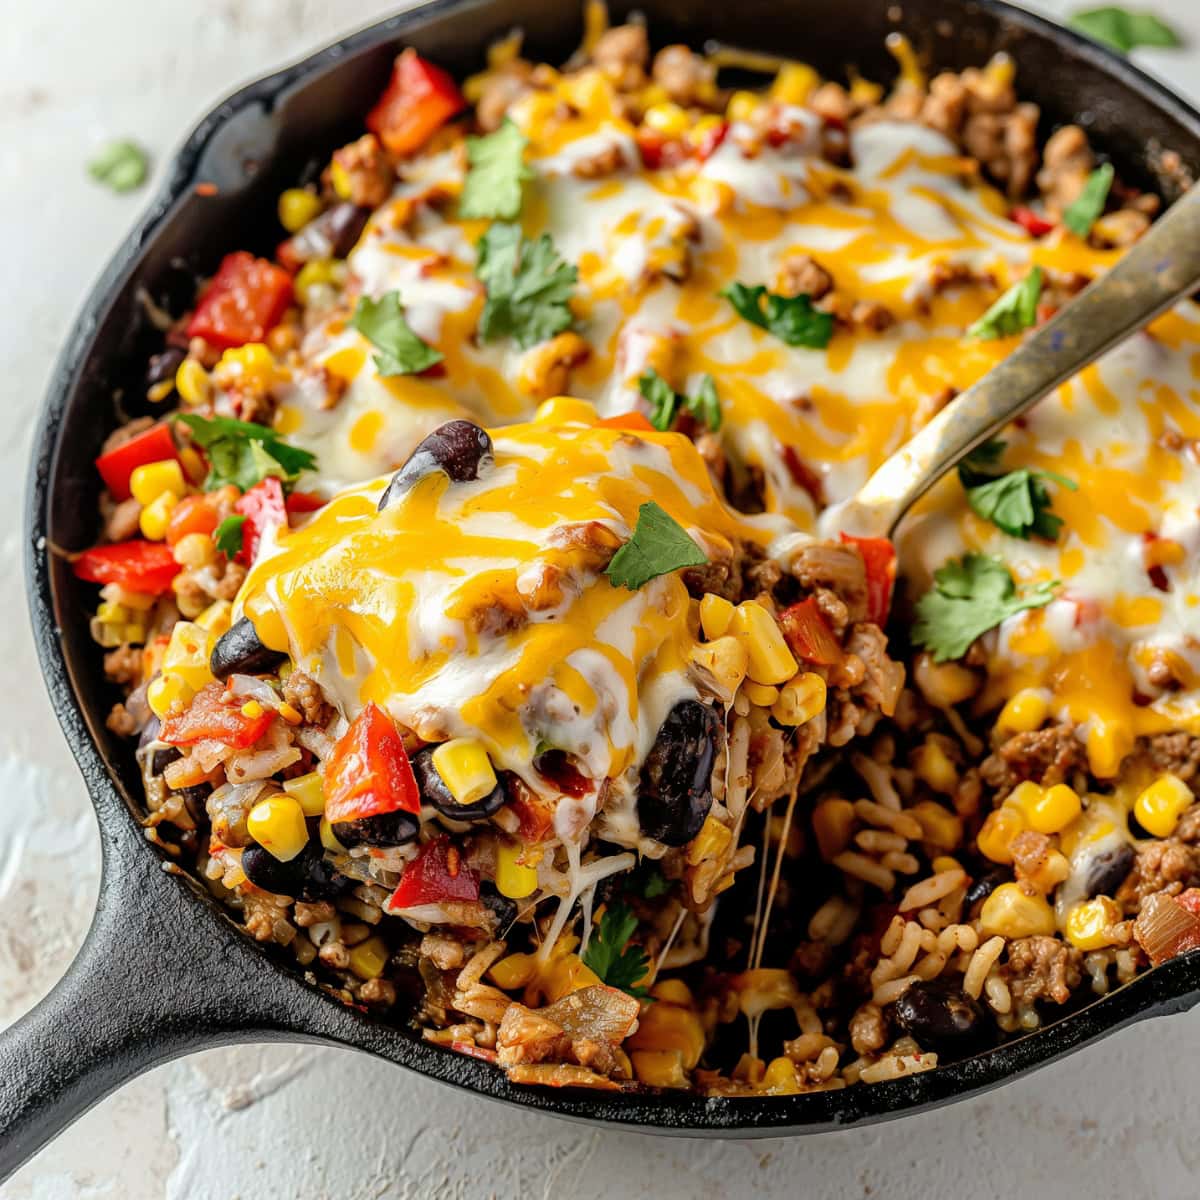 Cheesy taco skillet in a cast iron skillet made with Ground beef with diced red bell pepper, diced red onion, corn kernels, cooked rice, black beans, salsa topped with melted cheese on a cast iron skillet pan.